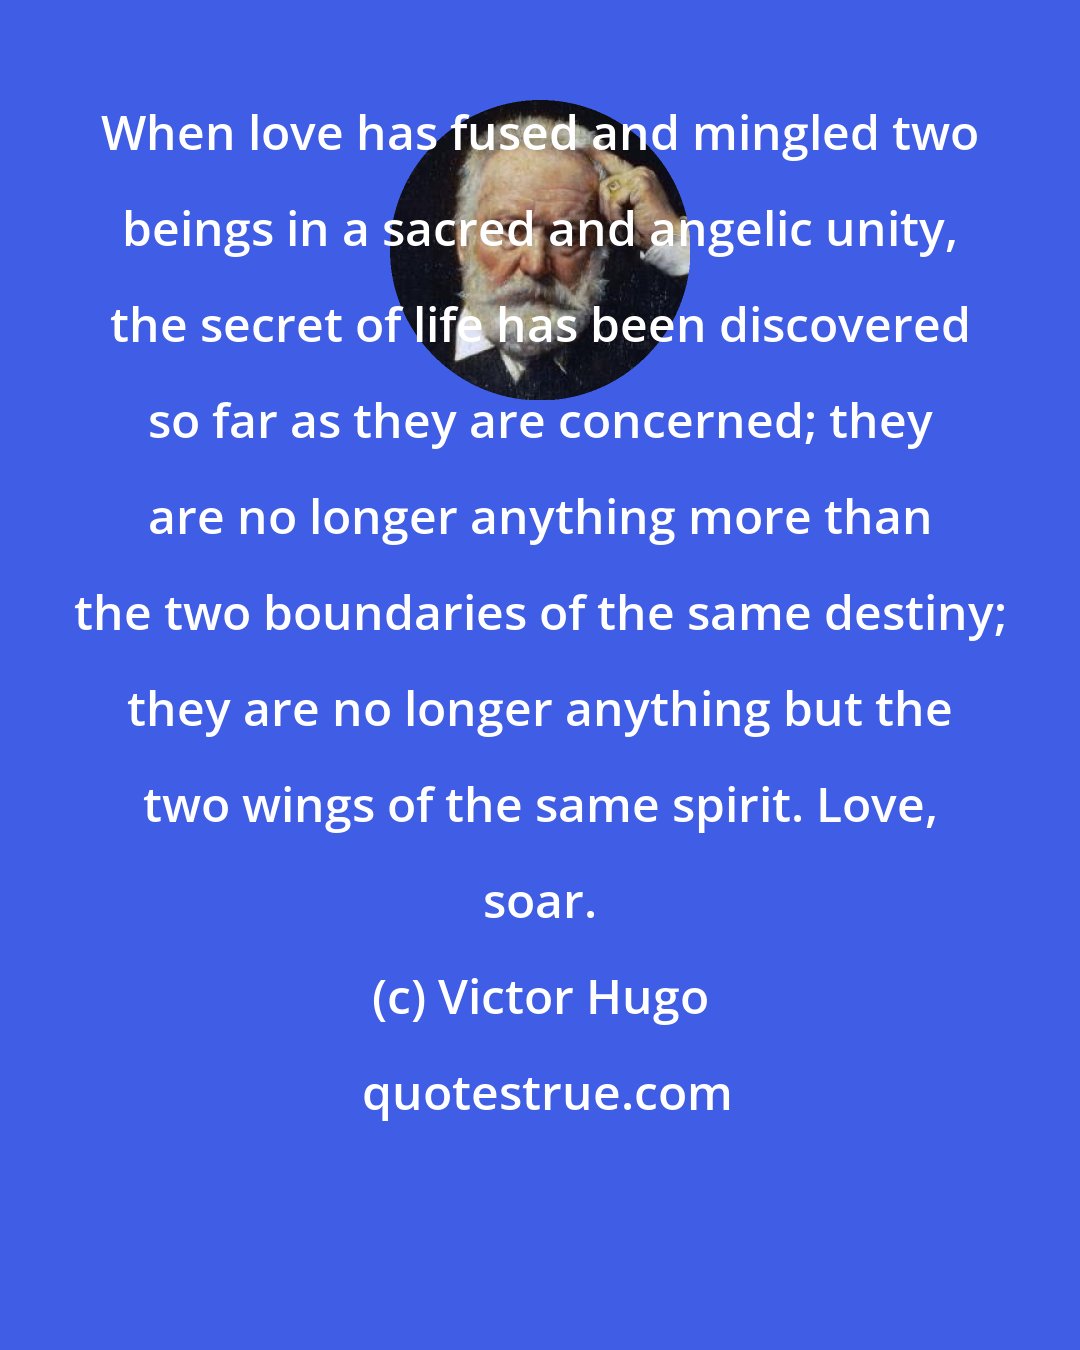 Victor Hugo: When love has fused and mingled two beings in a sacred and angelic unity, the secret of life has been discovered so far as they are concerned; they are no longer anything more than the two boundaries of the same destiny; they are no longer anything but the two wings of the same spirit. Love, soar.